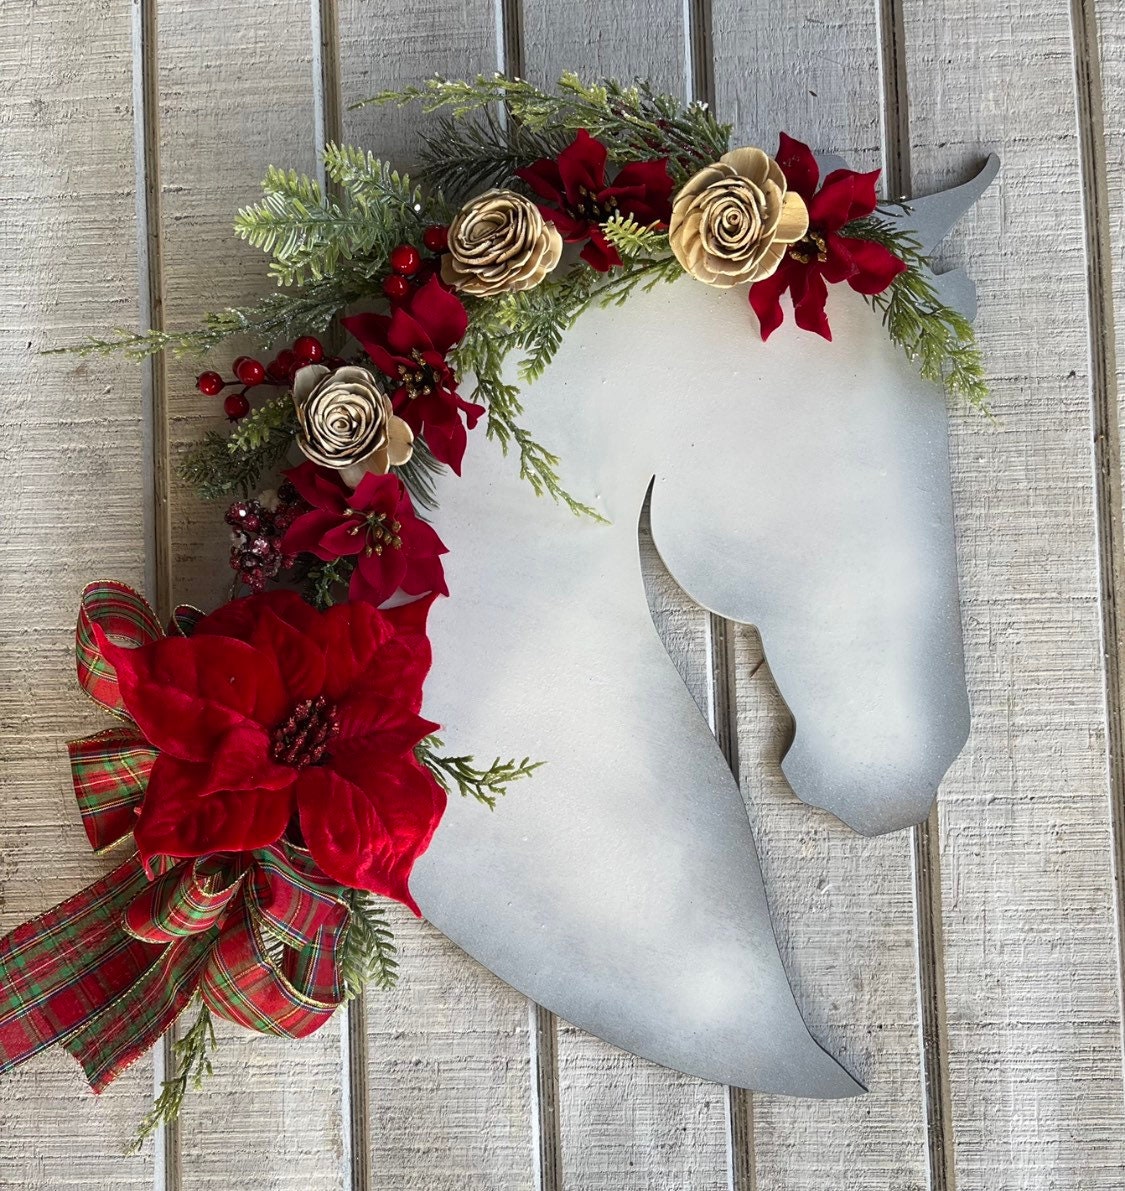 Horse Shoe Holiday 'Wreaths': A DIY Guide